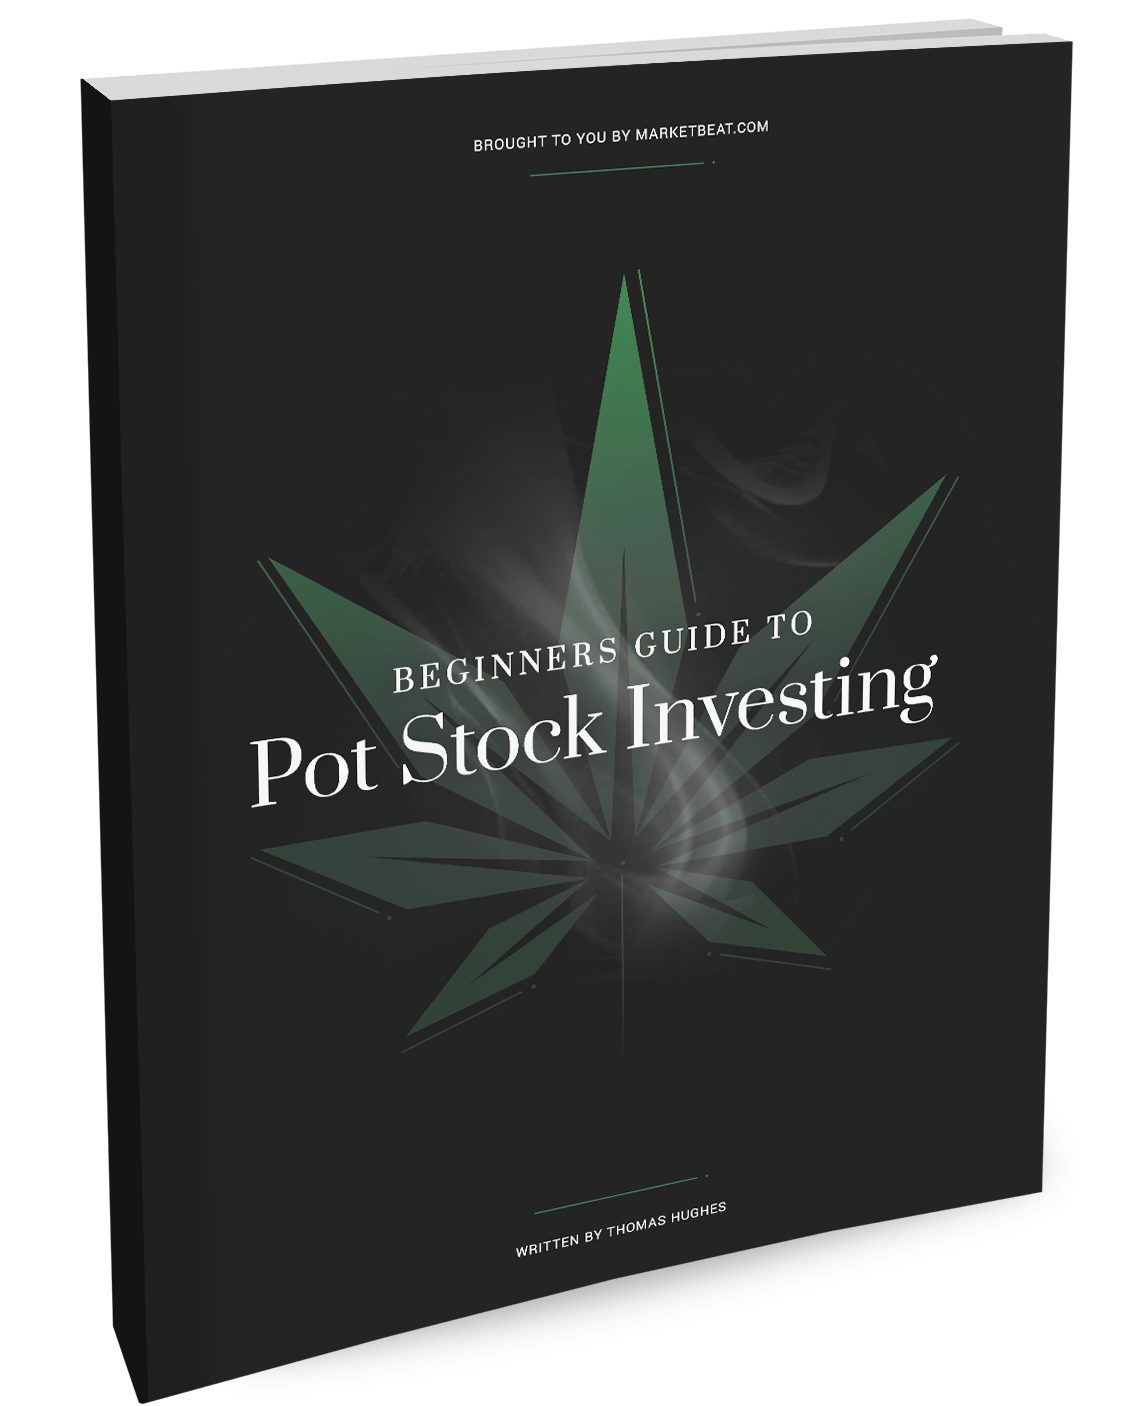 A Beginner's Guide to Hedging Pot Stock Investing